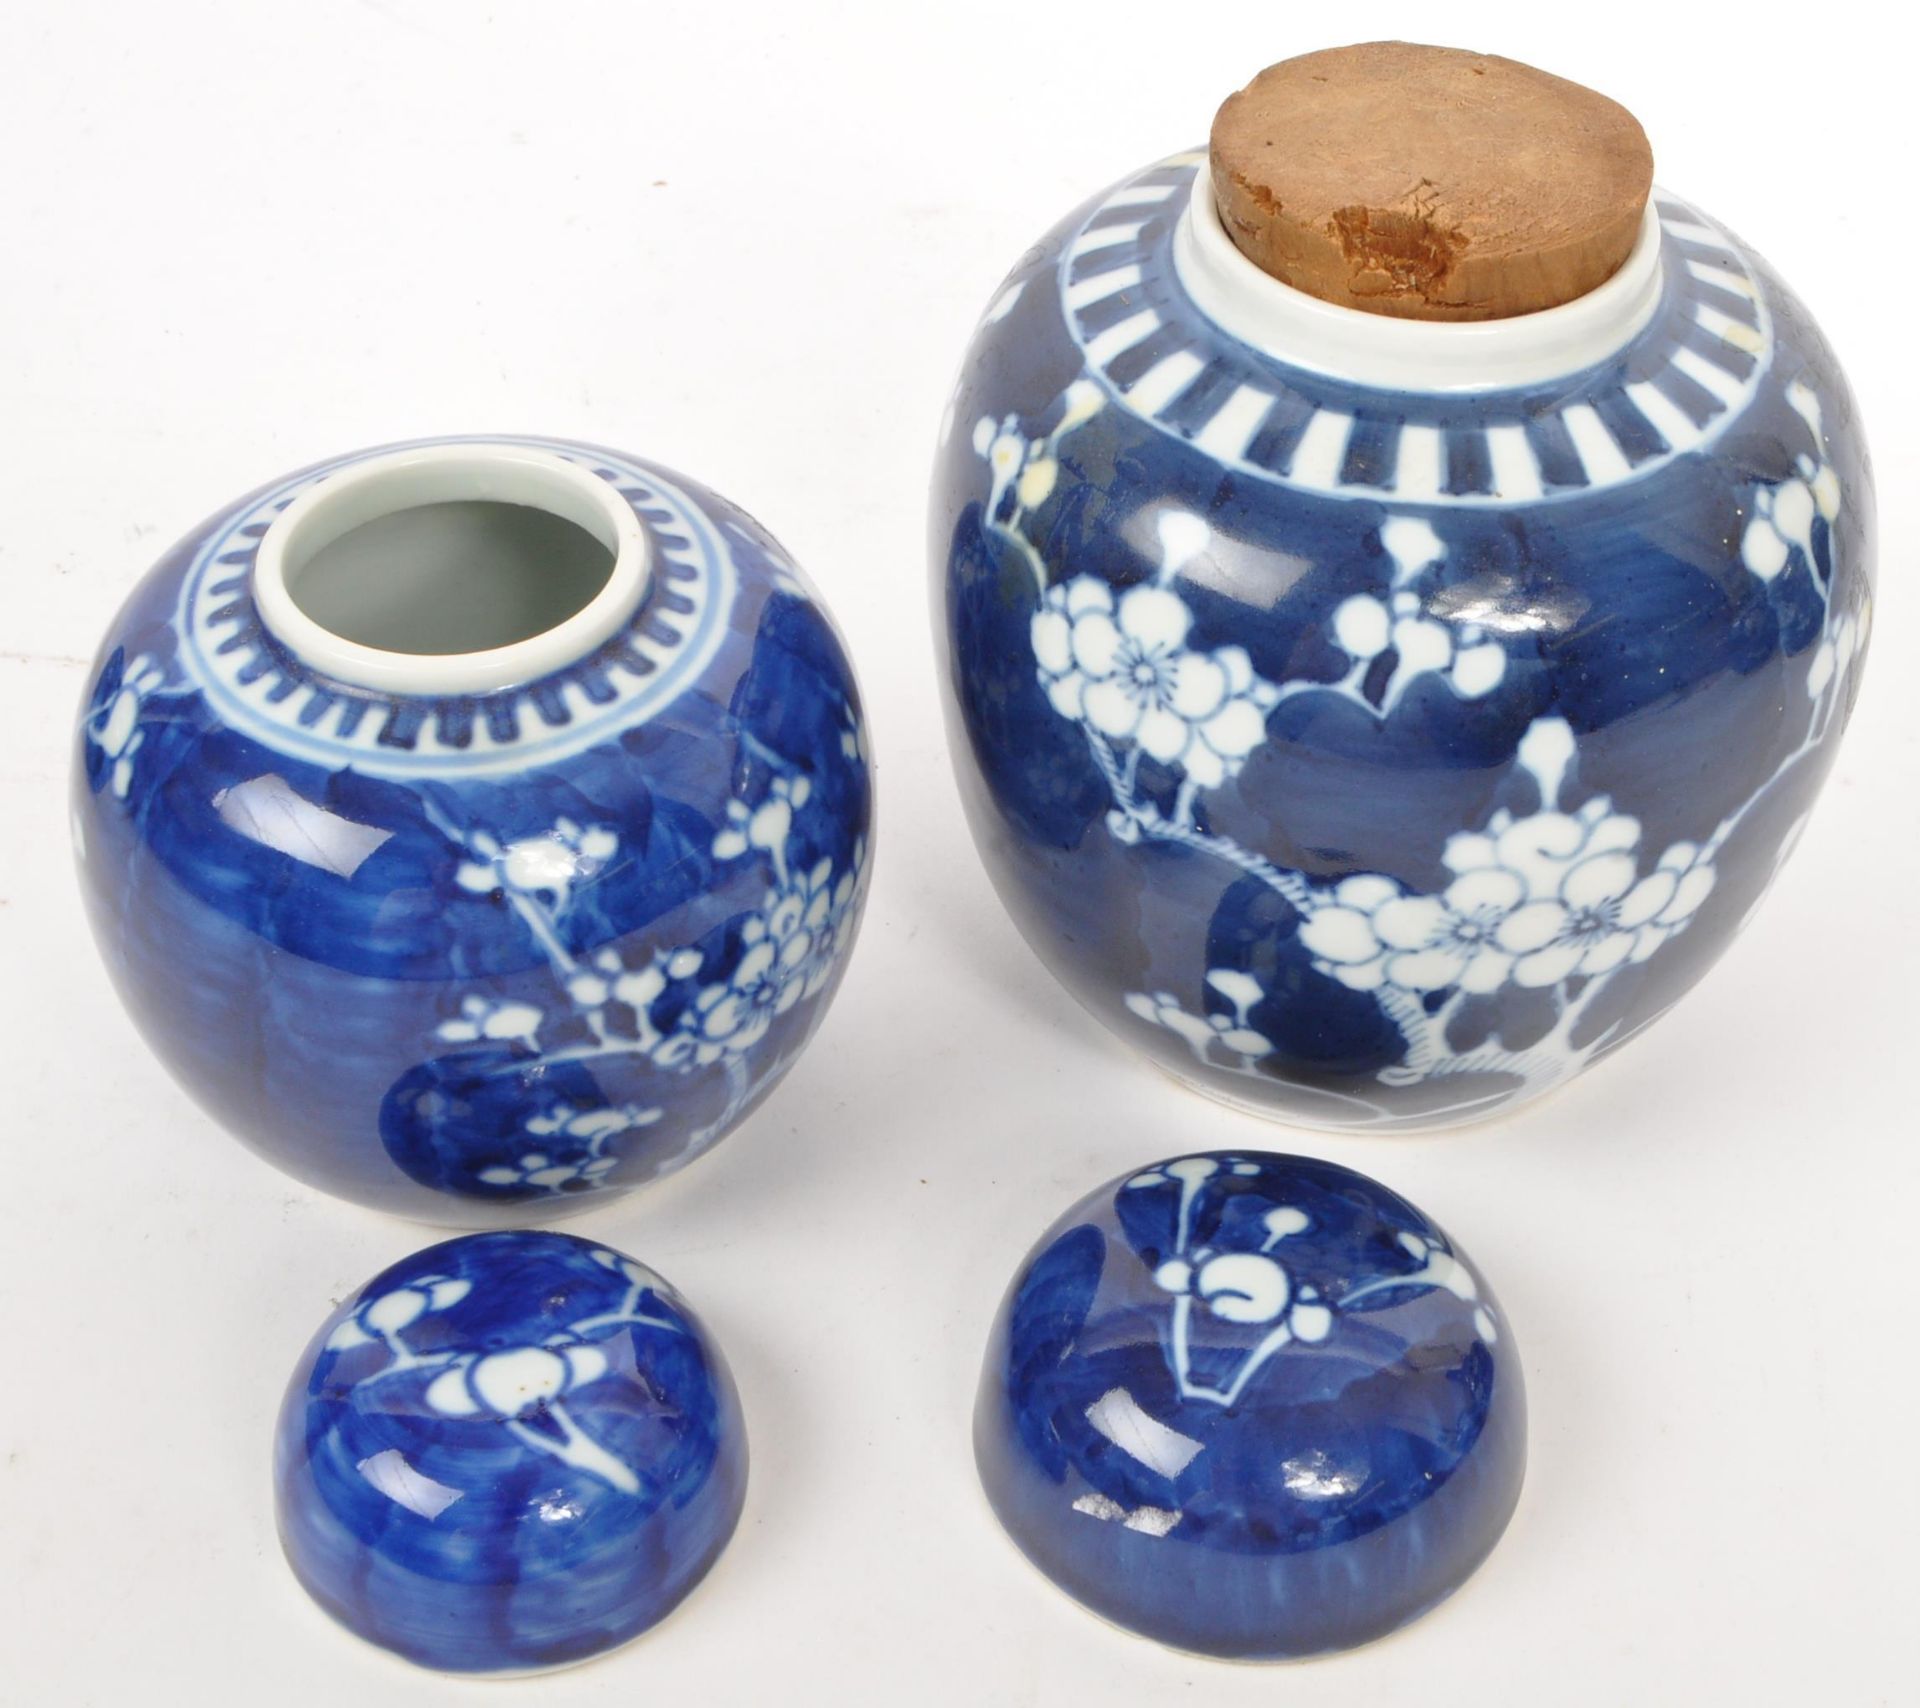 FIVE 19TH CENTURY & LATER CHINESE PORCELAIN PRUNUS GINGER JARS - Image 5 of 6